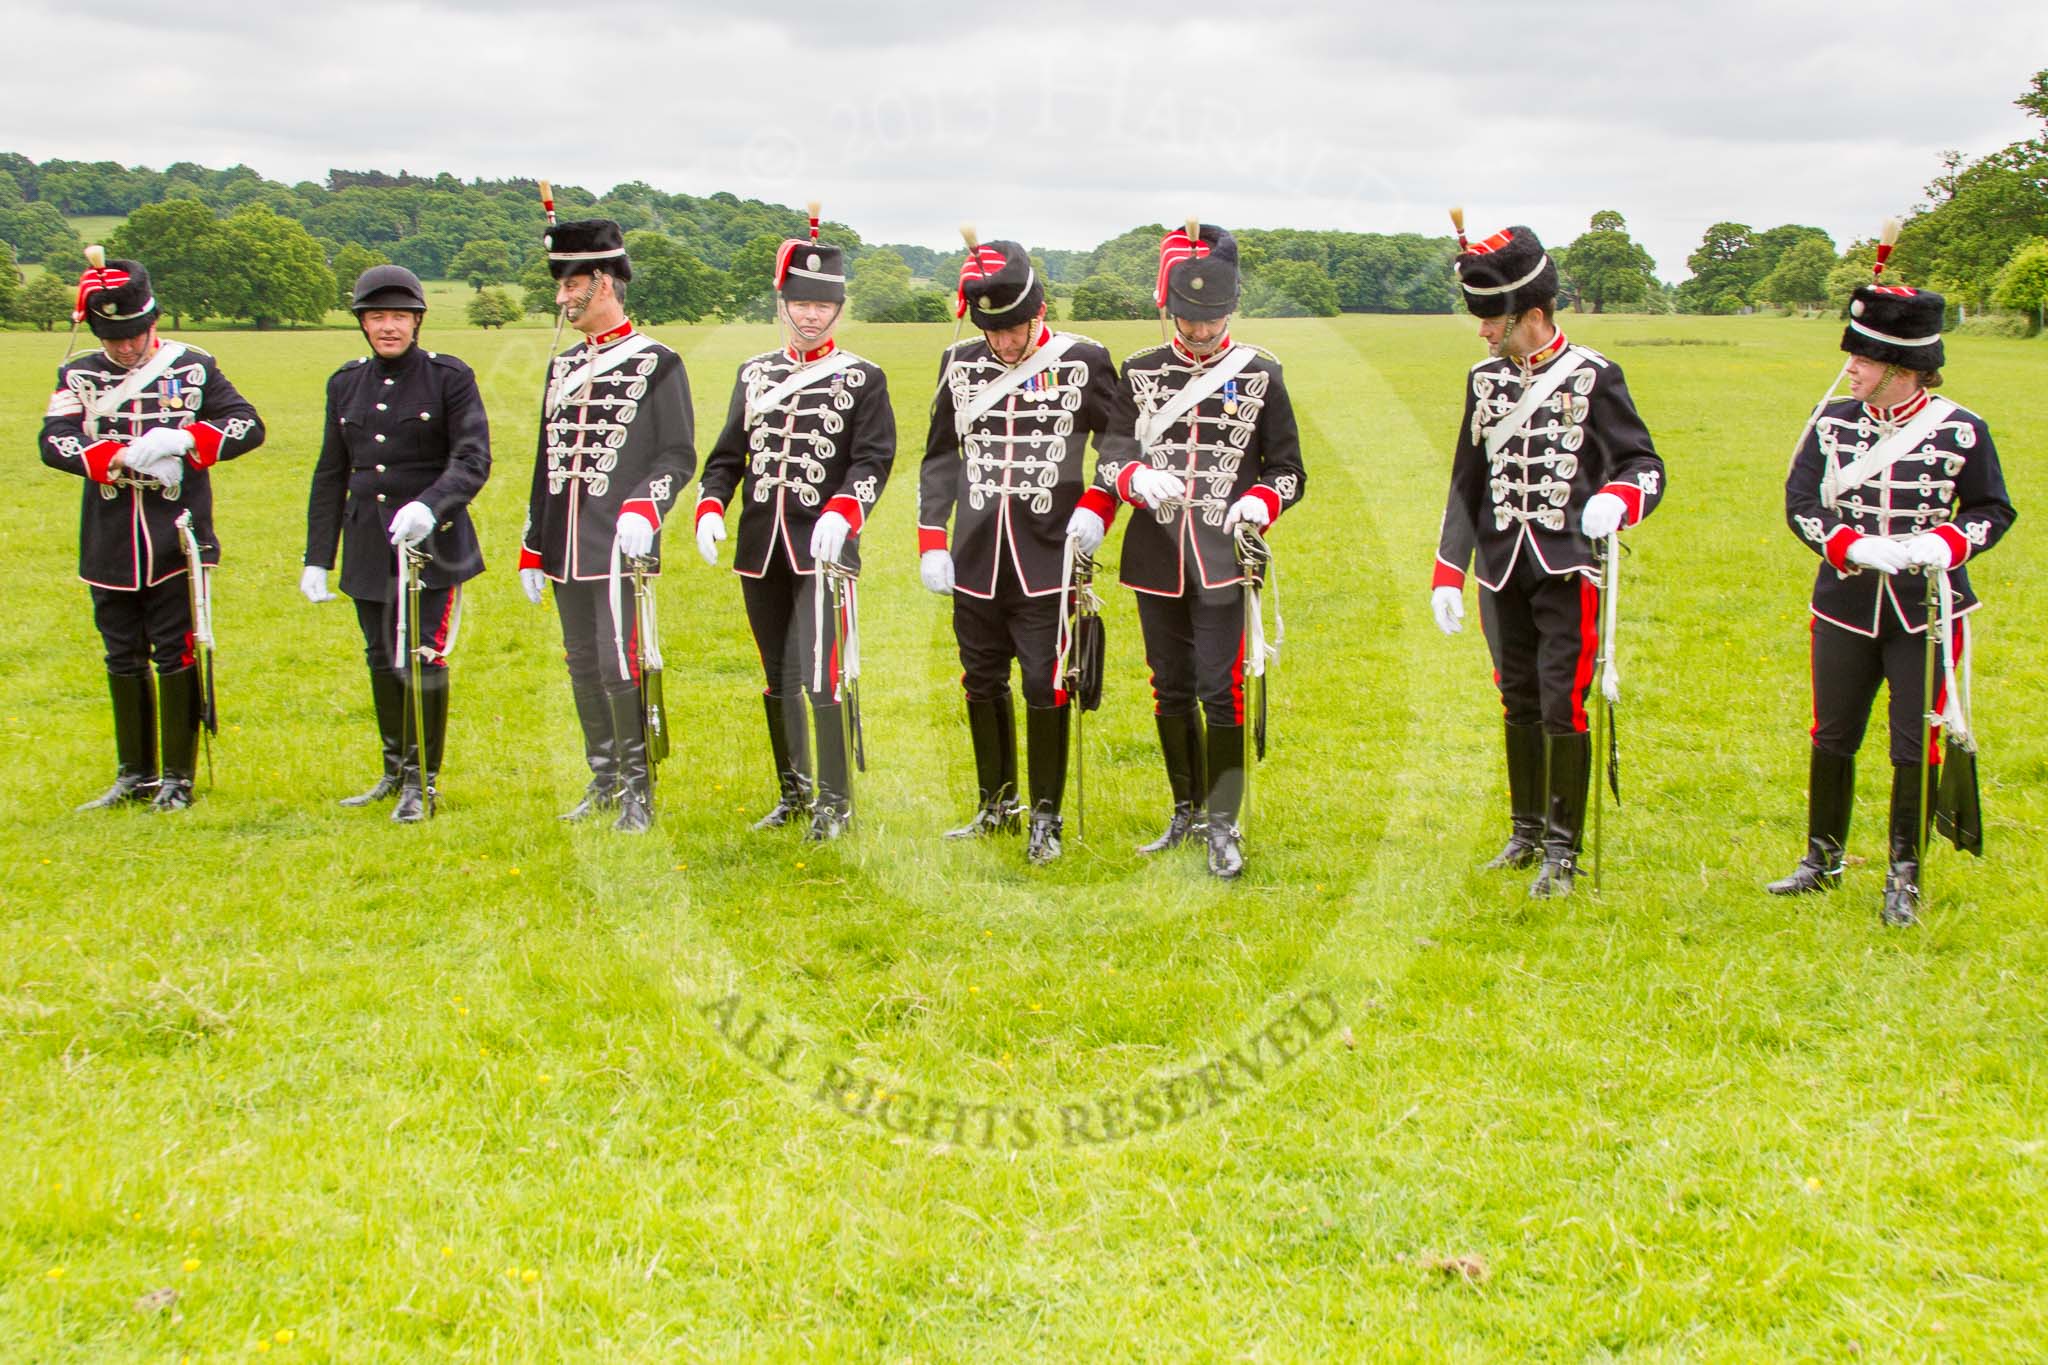 The Light Cavalry HAC Annual Review and Inspection 2013.
Windsor Great Park Review Ground,
Windsor,
Berkshire,
United Kingdom,
on 09 June 2013 at 12:28, image #169